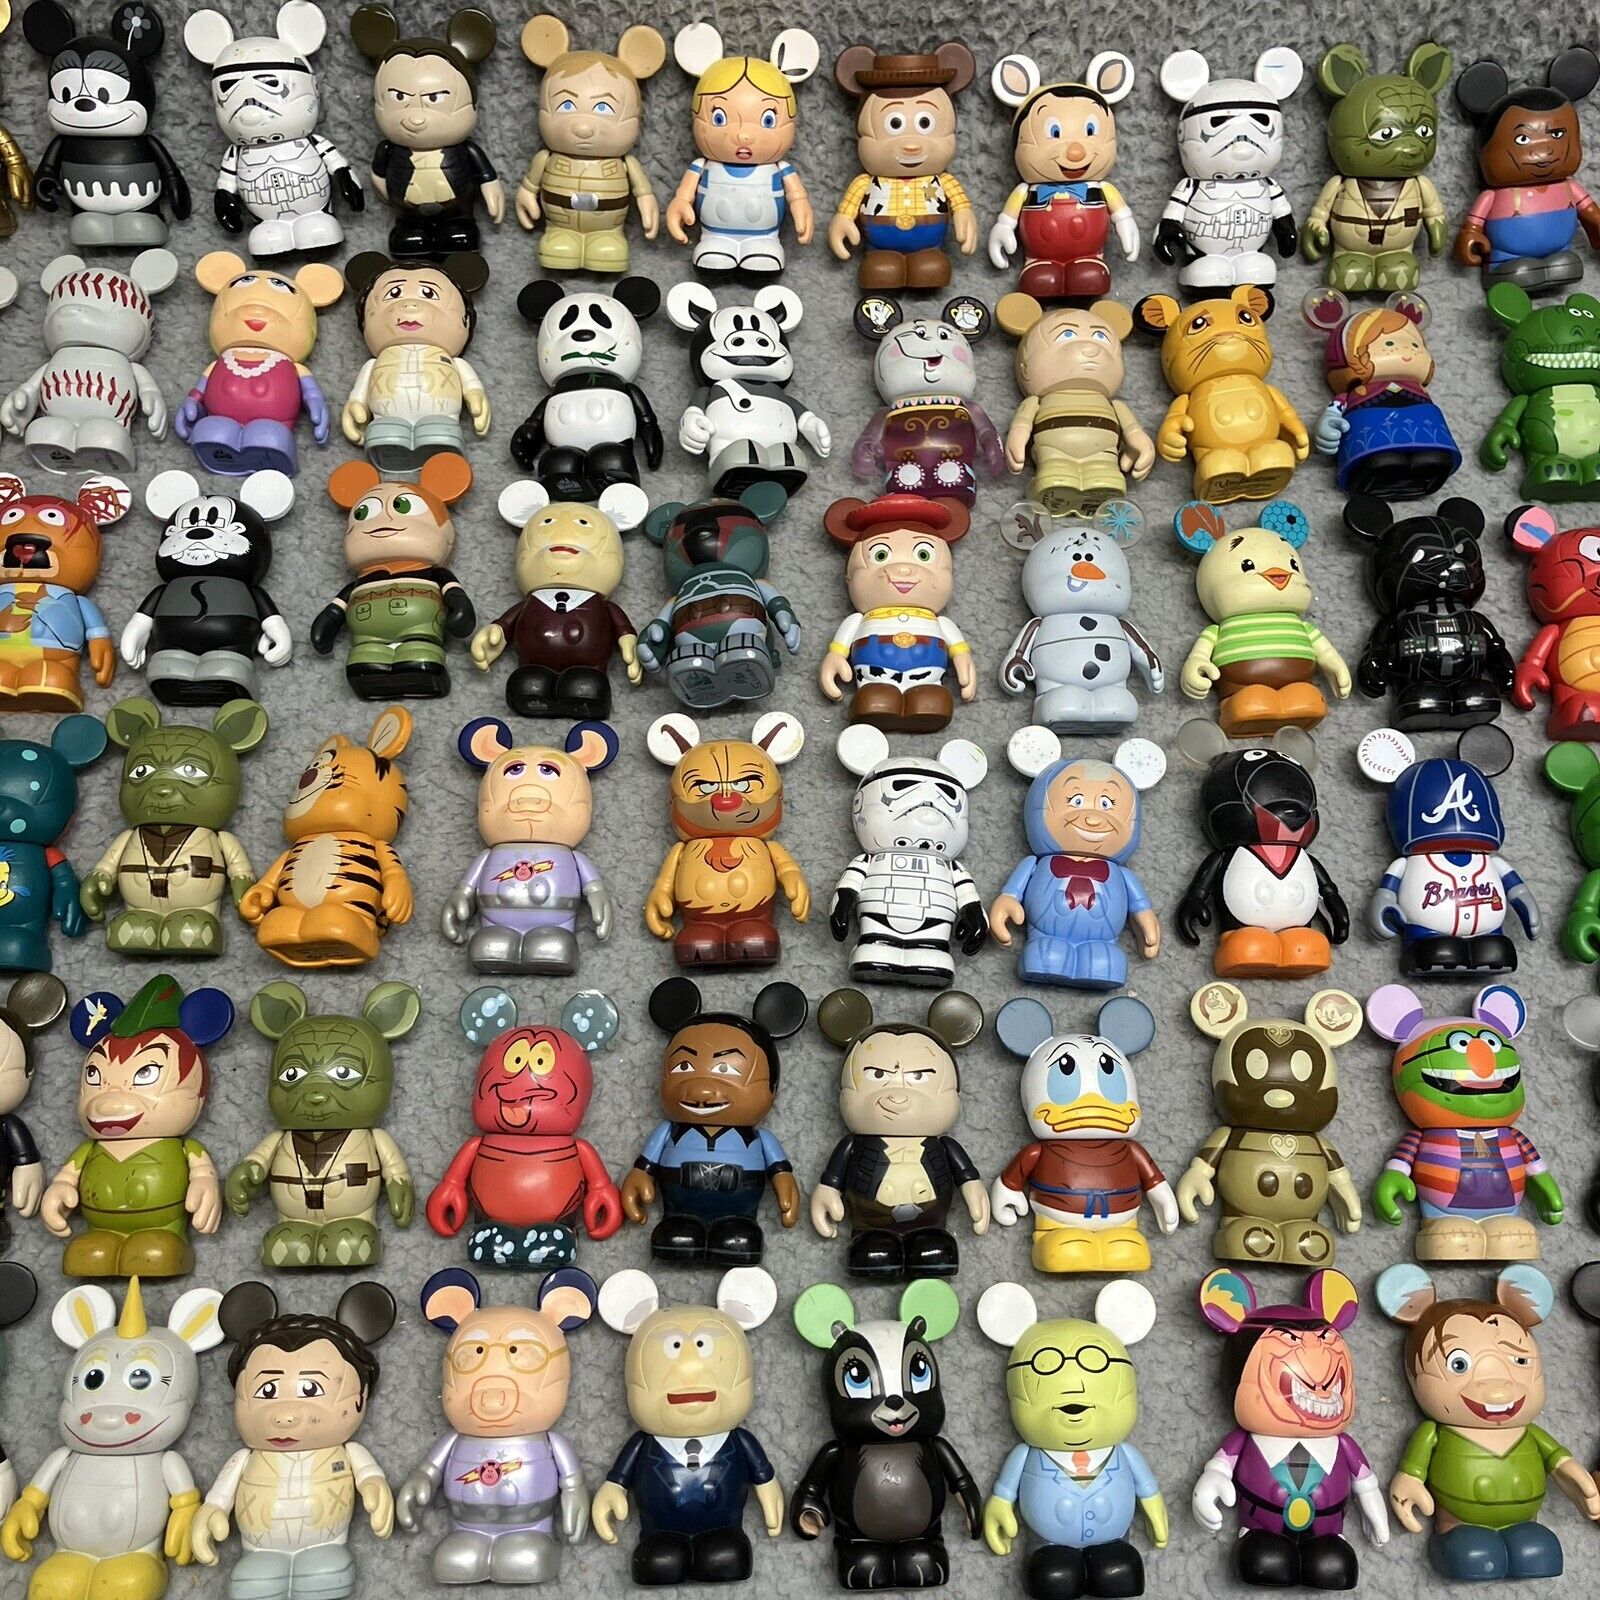 Lot of 99 Disney 3” & 1.5” Vinylmation Characters Star Wars Villains *READ MORE*